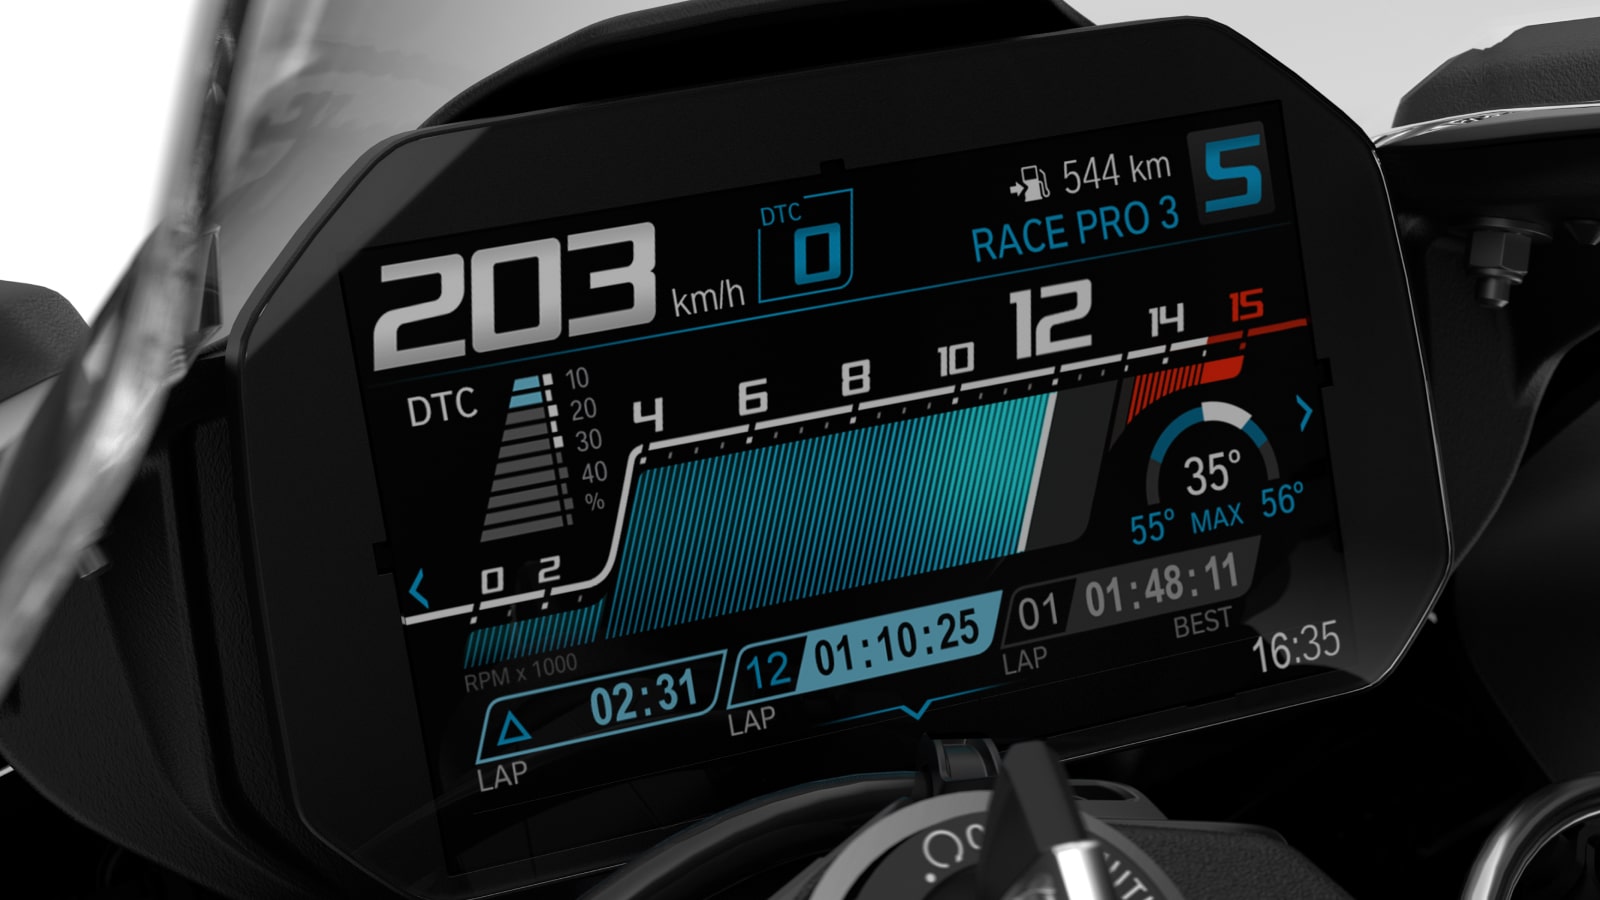 BMW S1000RR Digital Interface race pro mode showing lean angle, rev counter and lap times